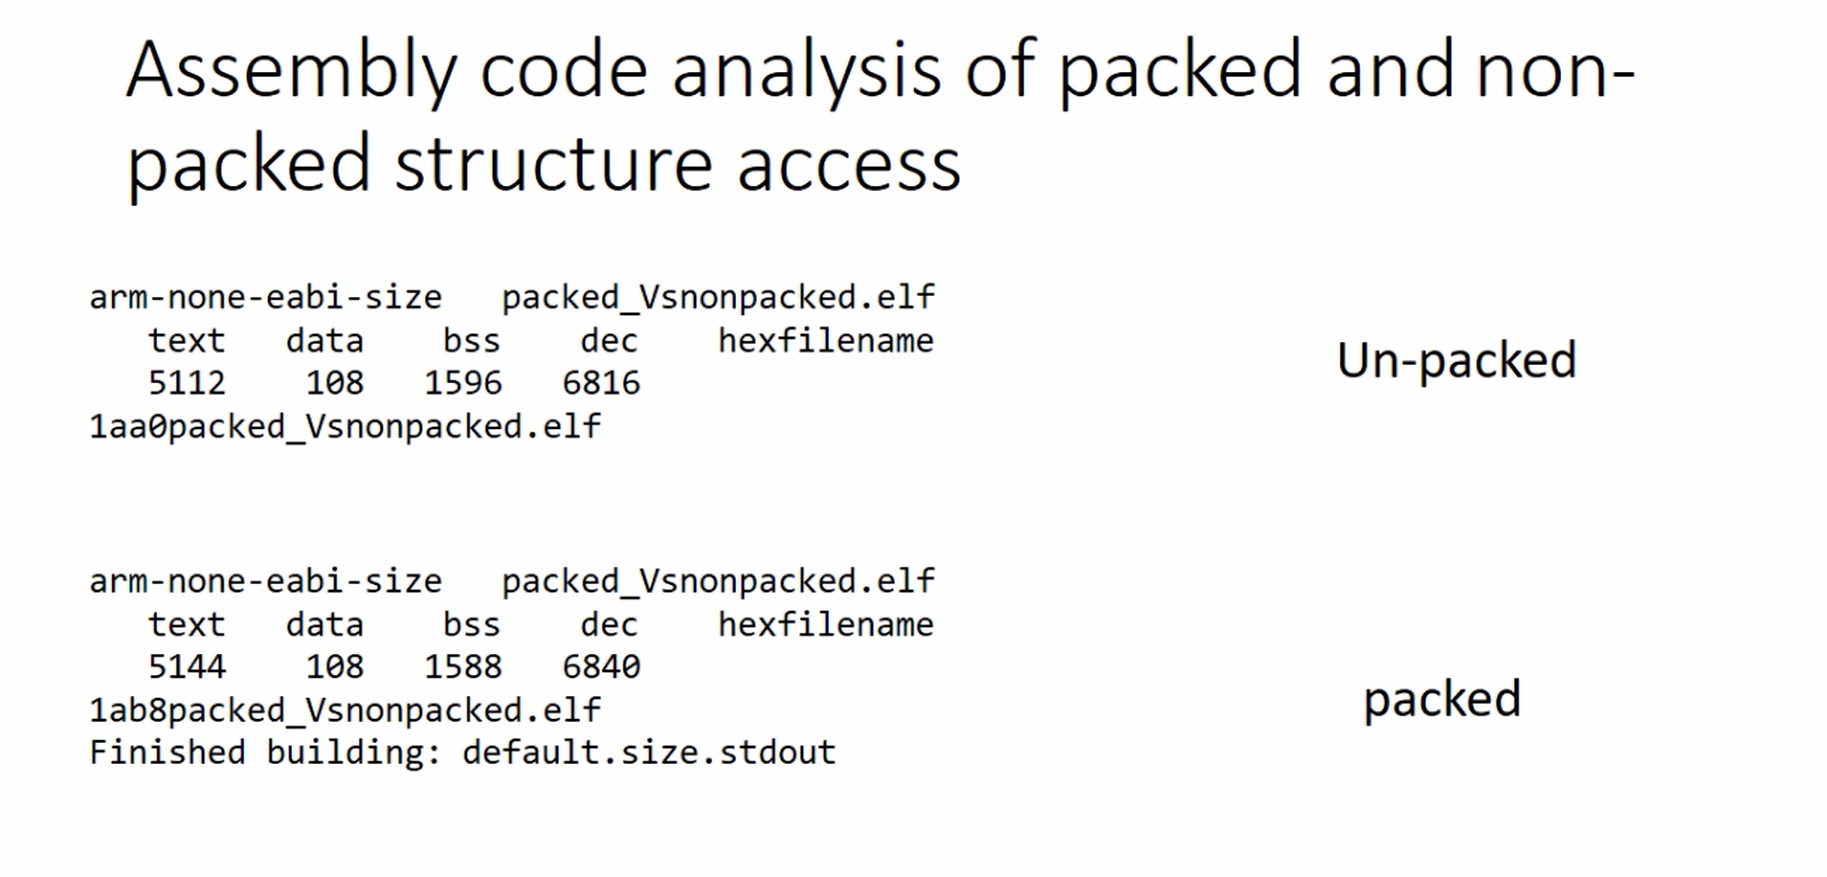 Figure 1. Assembly code analysis of packed and non-packed structure access